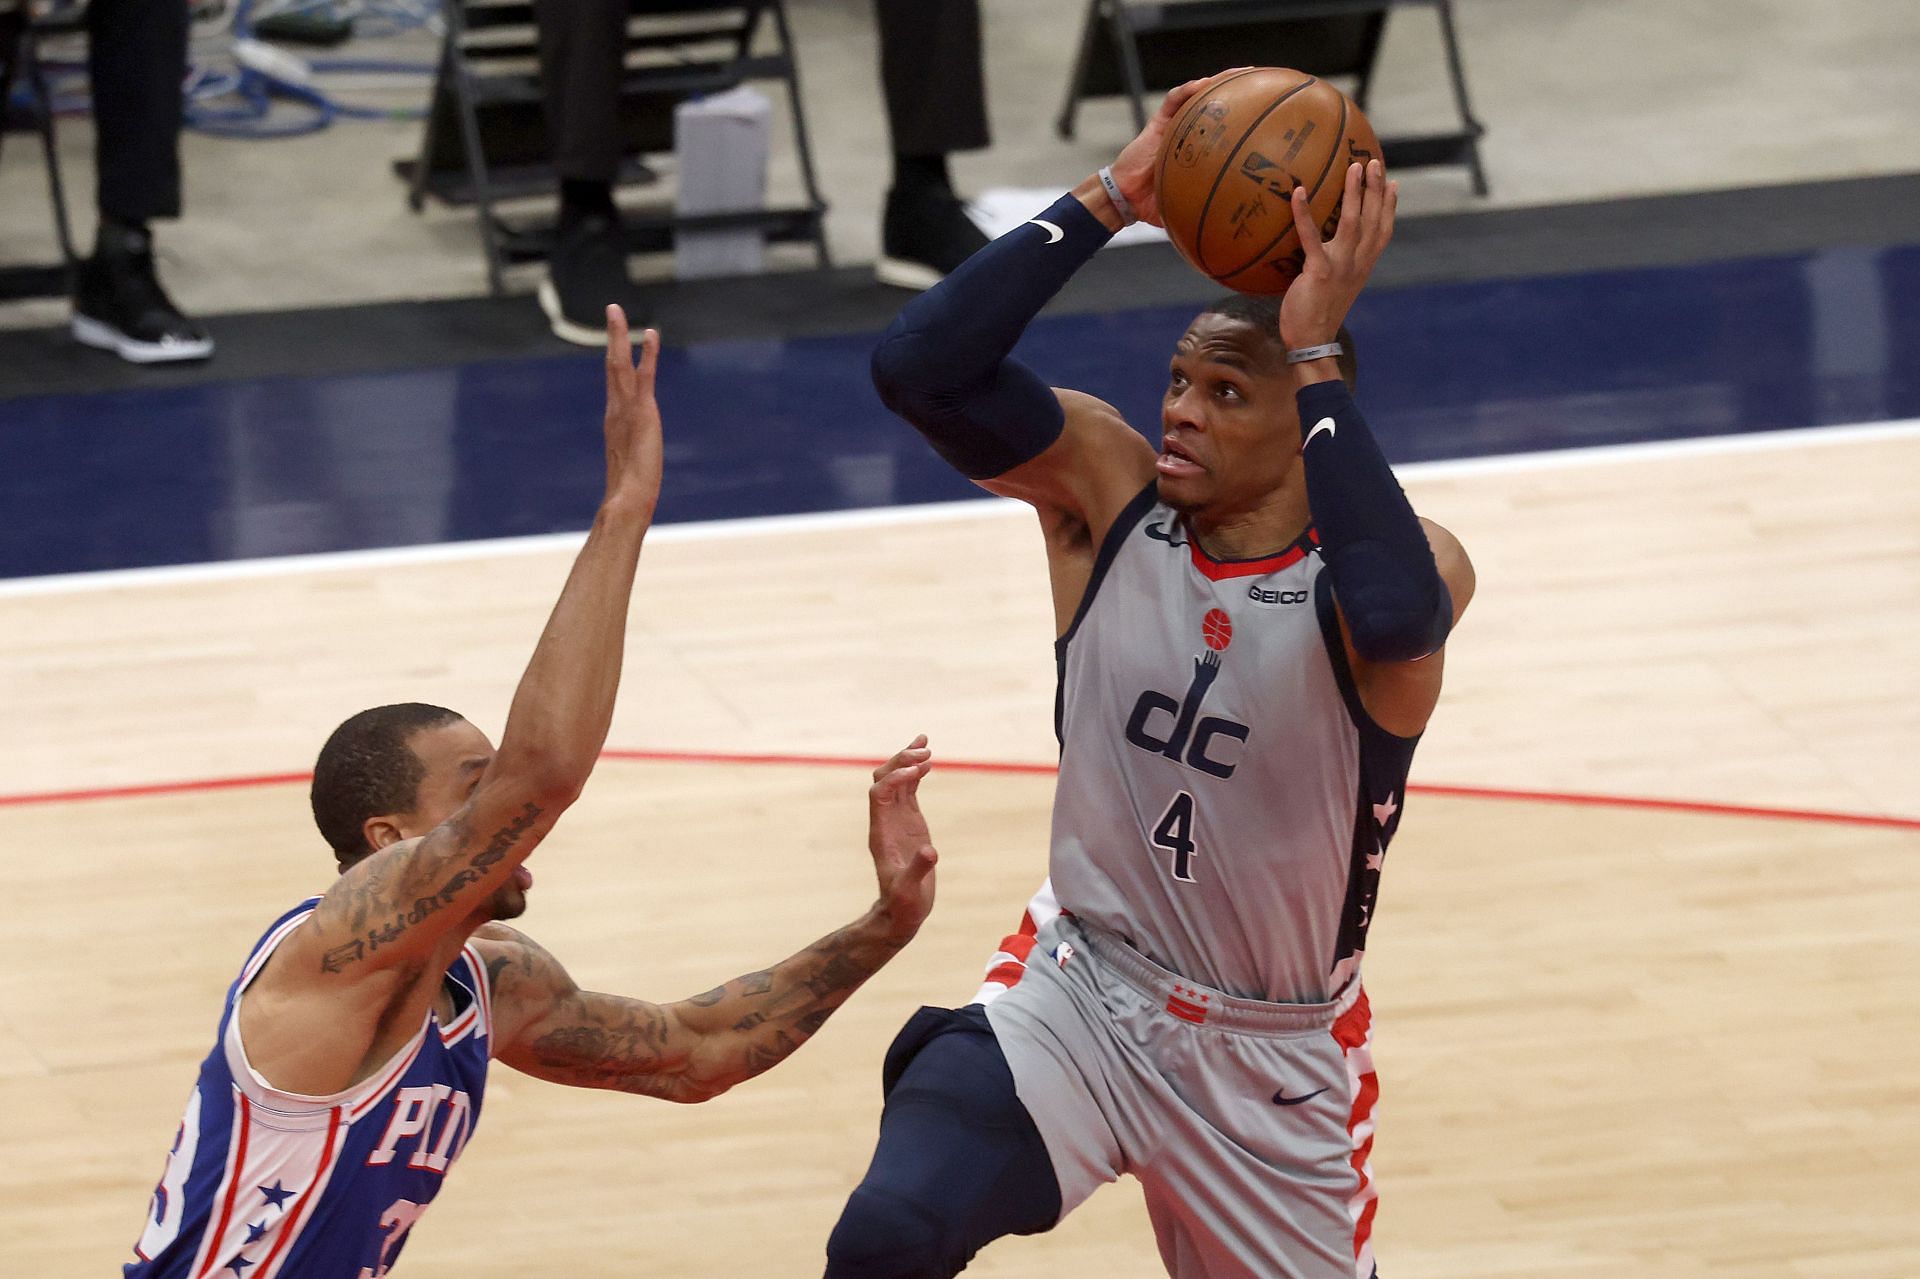 Russell Westbrook #4 of the Washington Wizards puts up a shot against the Philadelphia 76ers